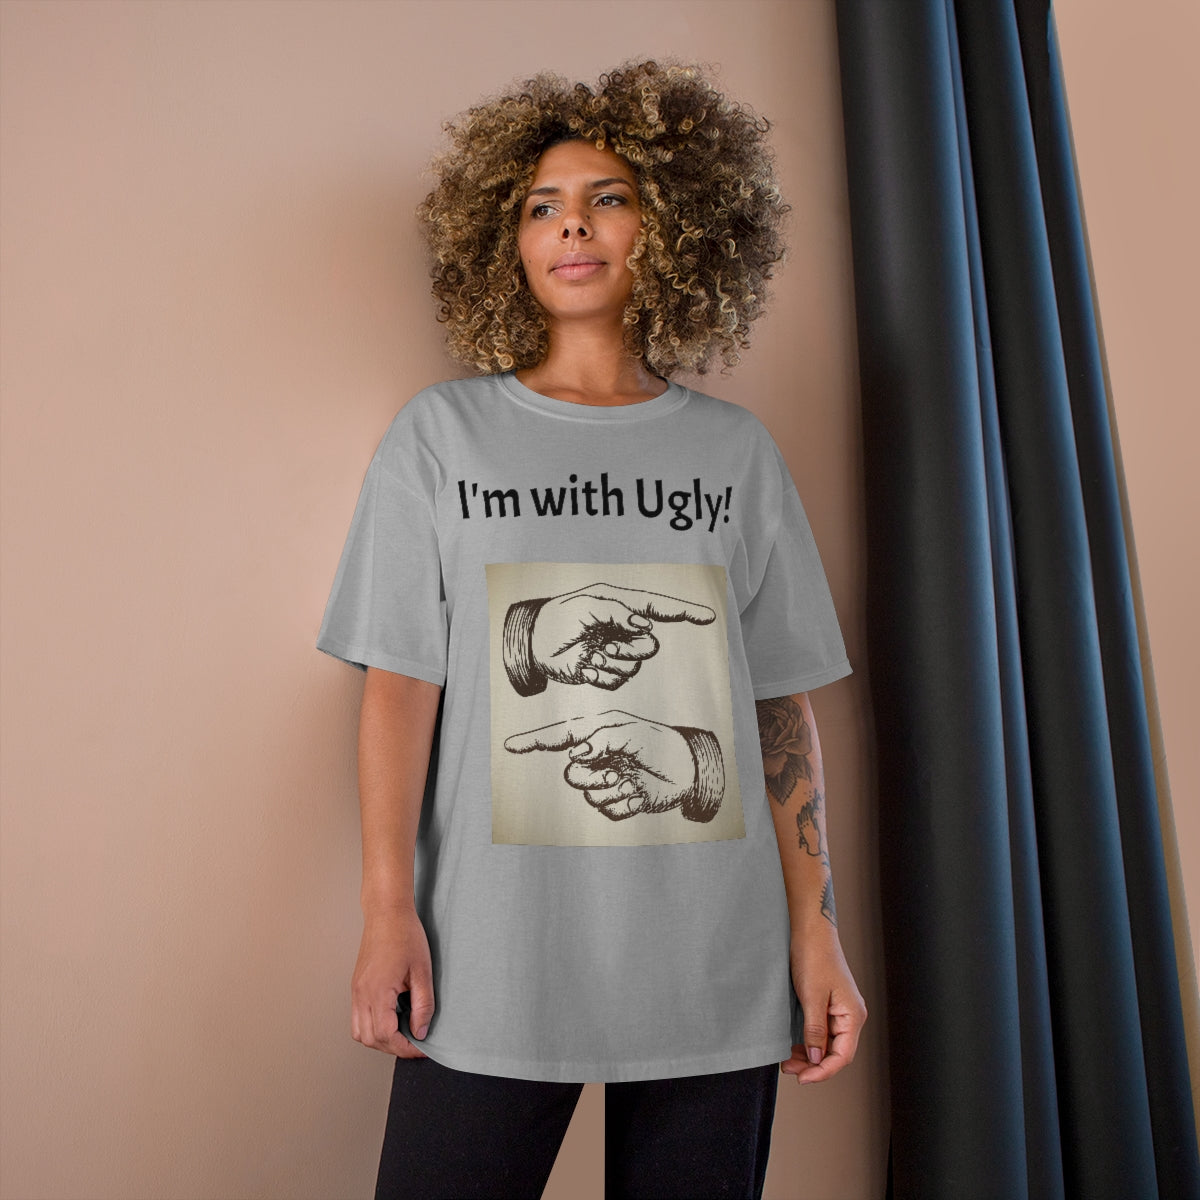 The "I'm with Ugly" Champion T-Shirt